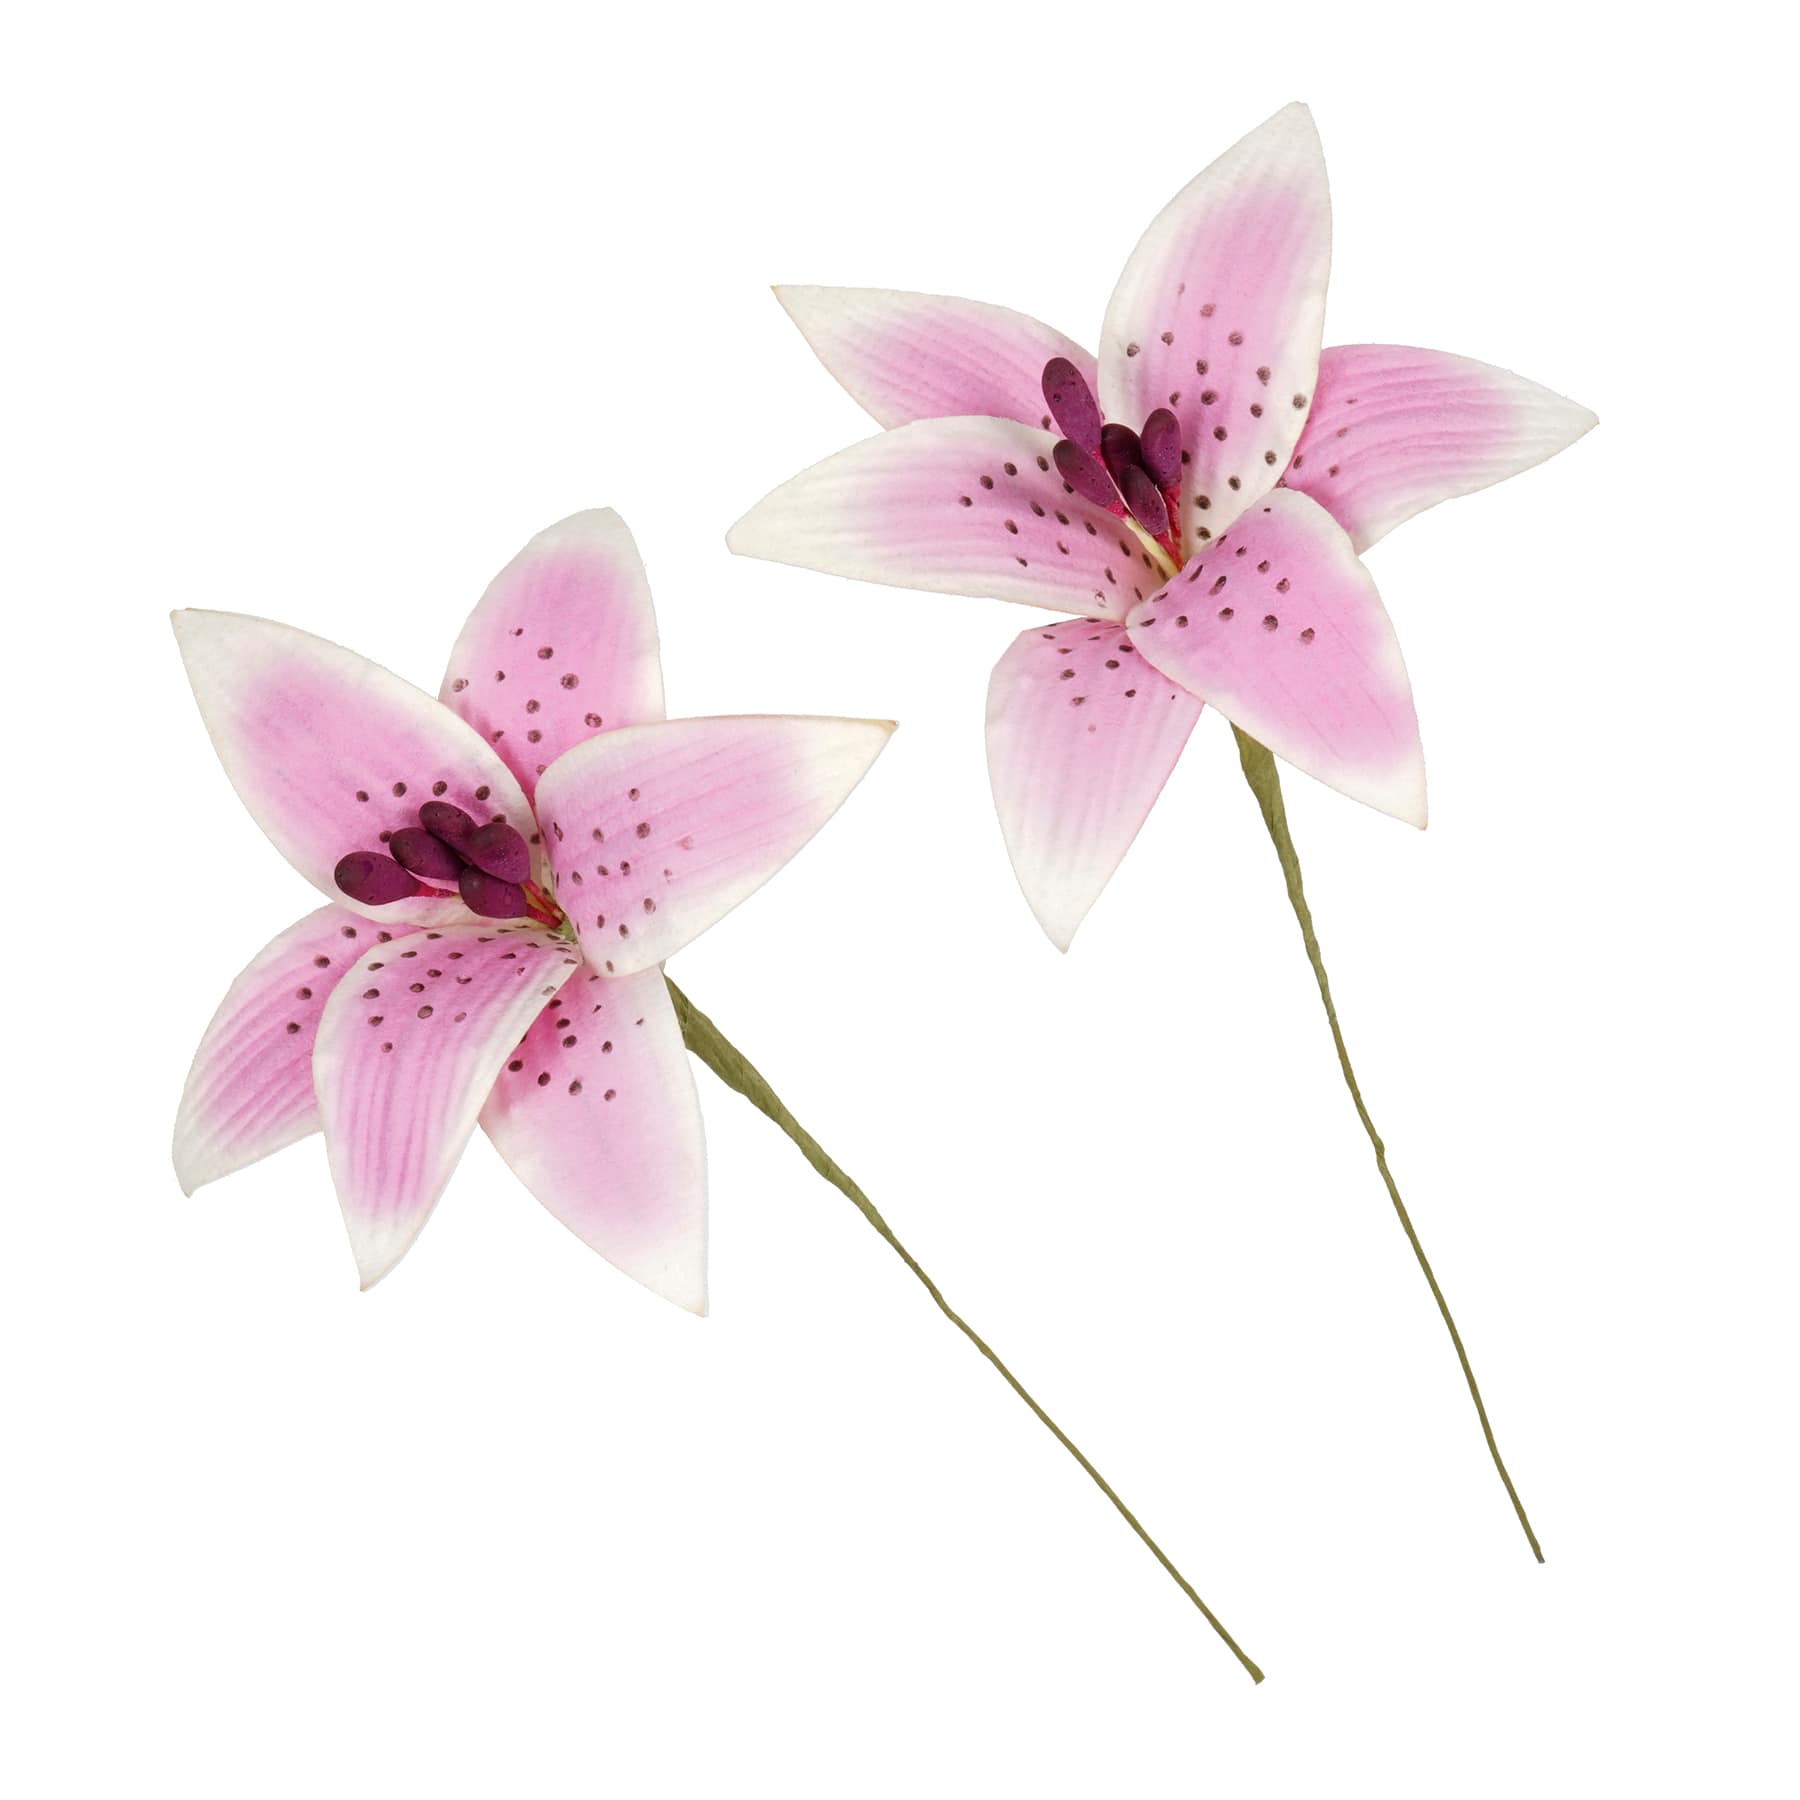 pink tiger lily flowers